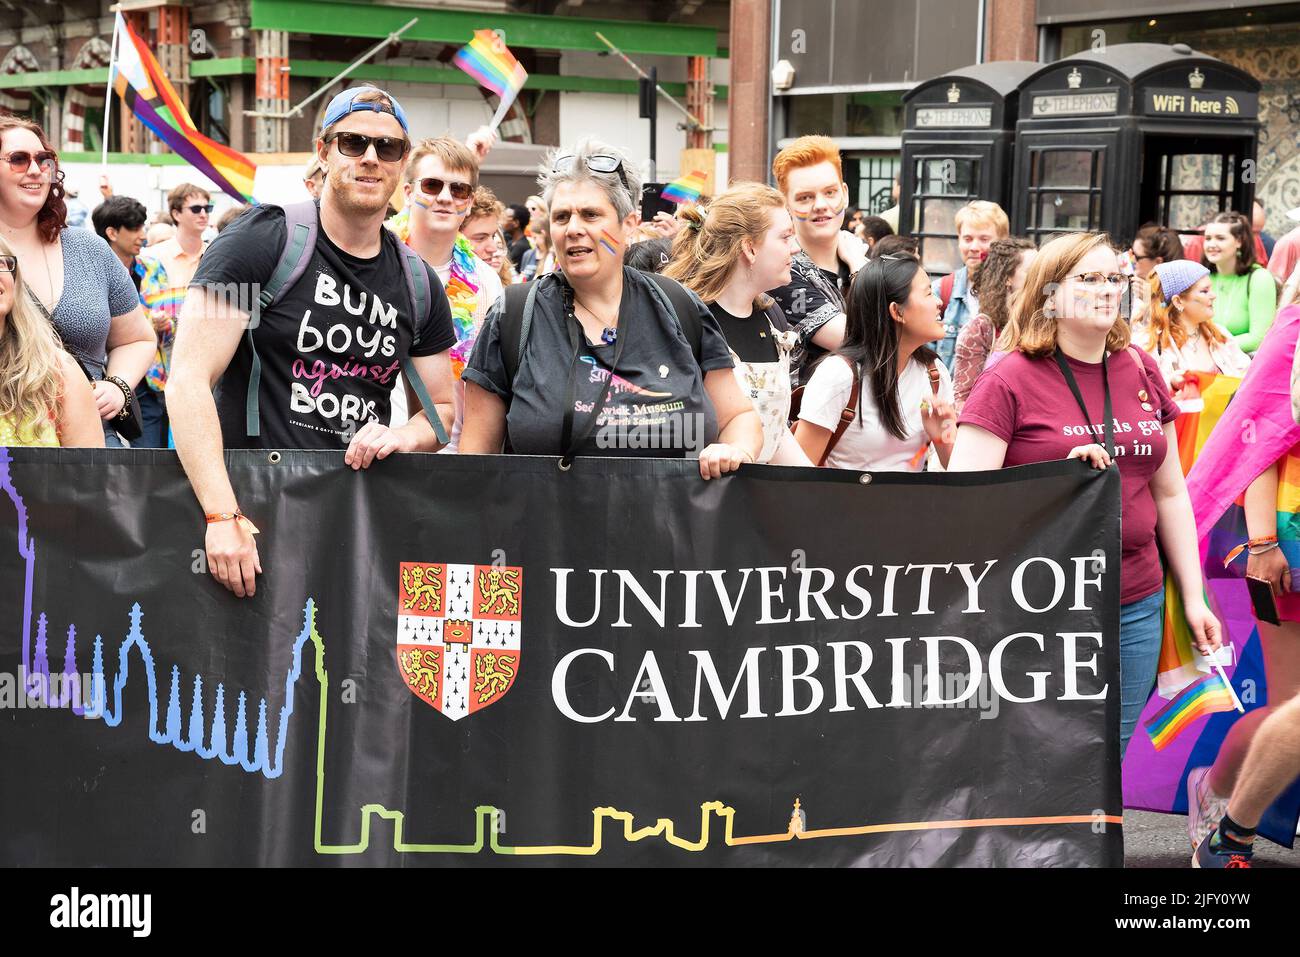 Piccadilly, London, UK. 2nd July 2022. London Pride March 2022. Celebrating 50 Years of Pride in the UK and following the same central London route taken in 1972. University of Cambridge banner and man wearing Bum Boys Against Boris tee shirt.  Credit: Stephen Bell/Alamy Stock Photo